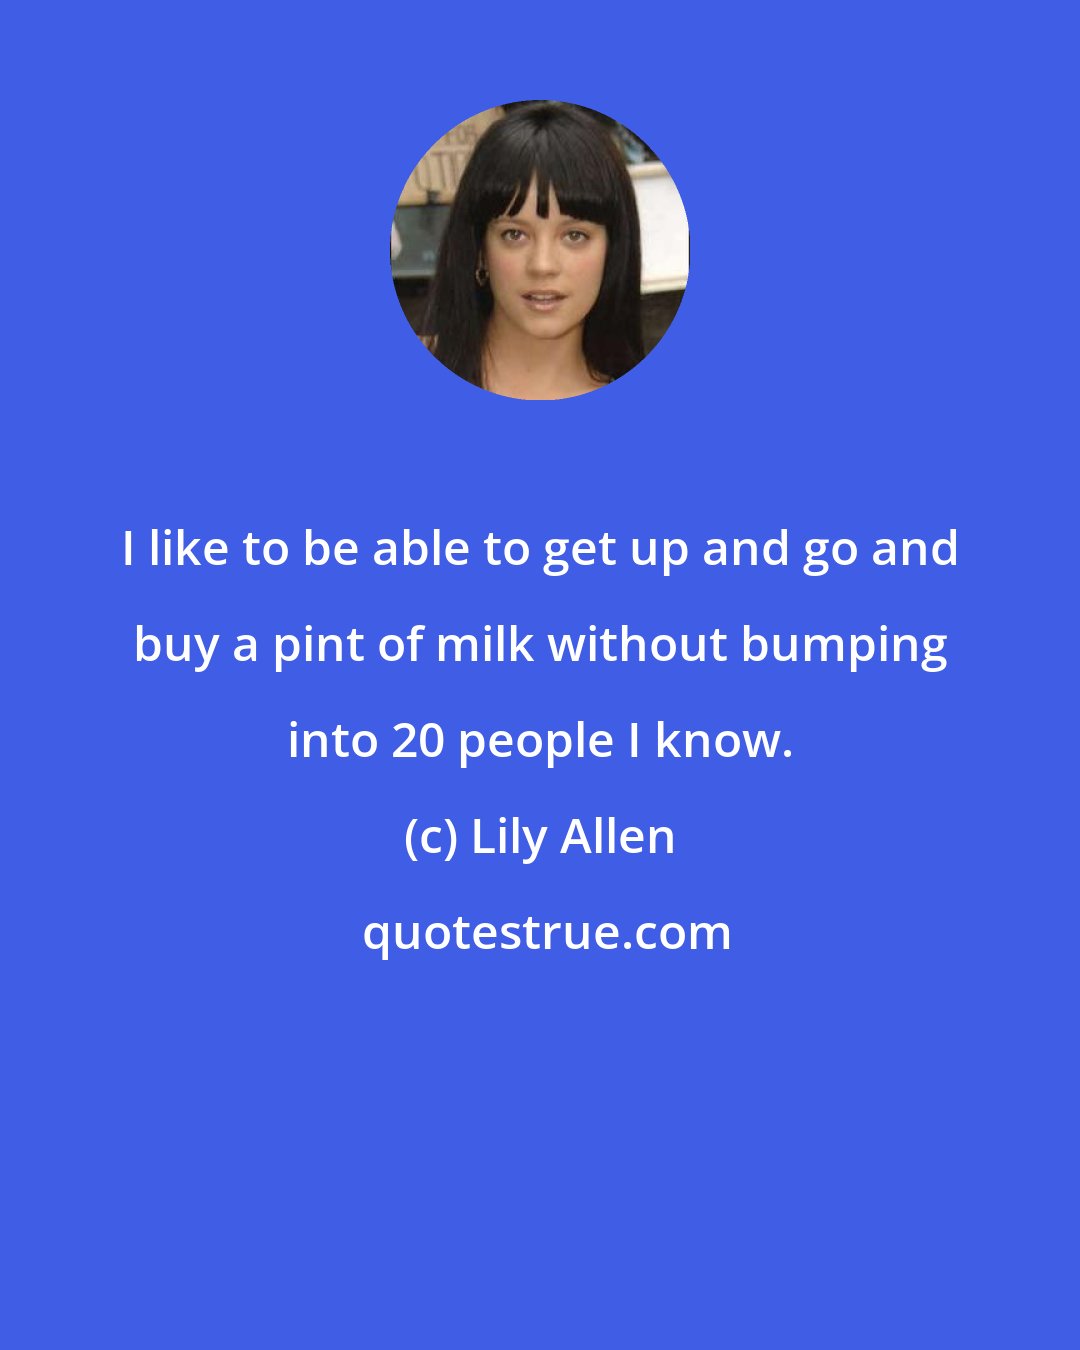 Lily Allen: I like to be able to get up and go and buy a pint of milk without bumping into 20 people I know.